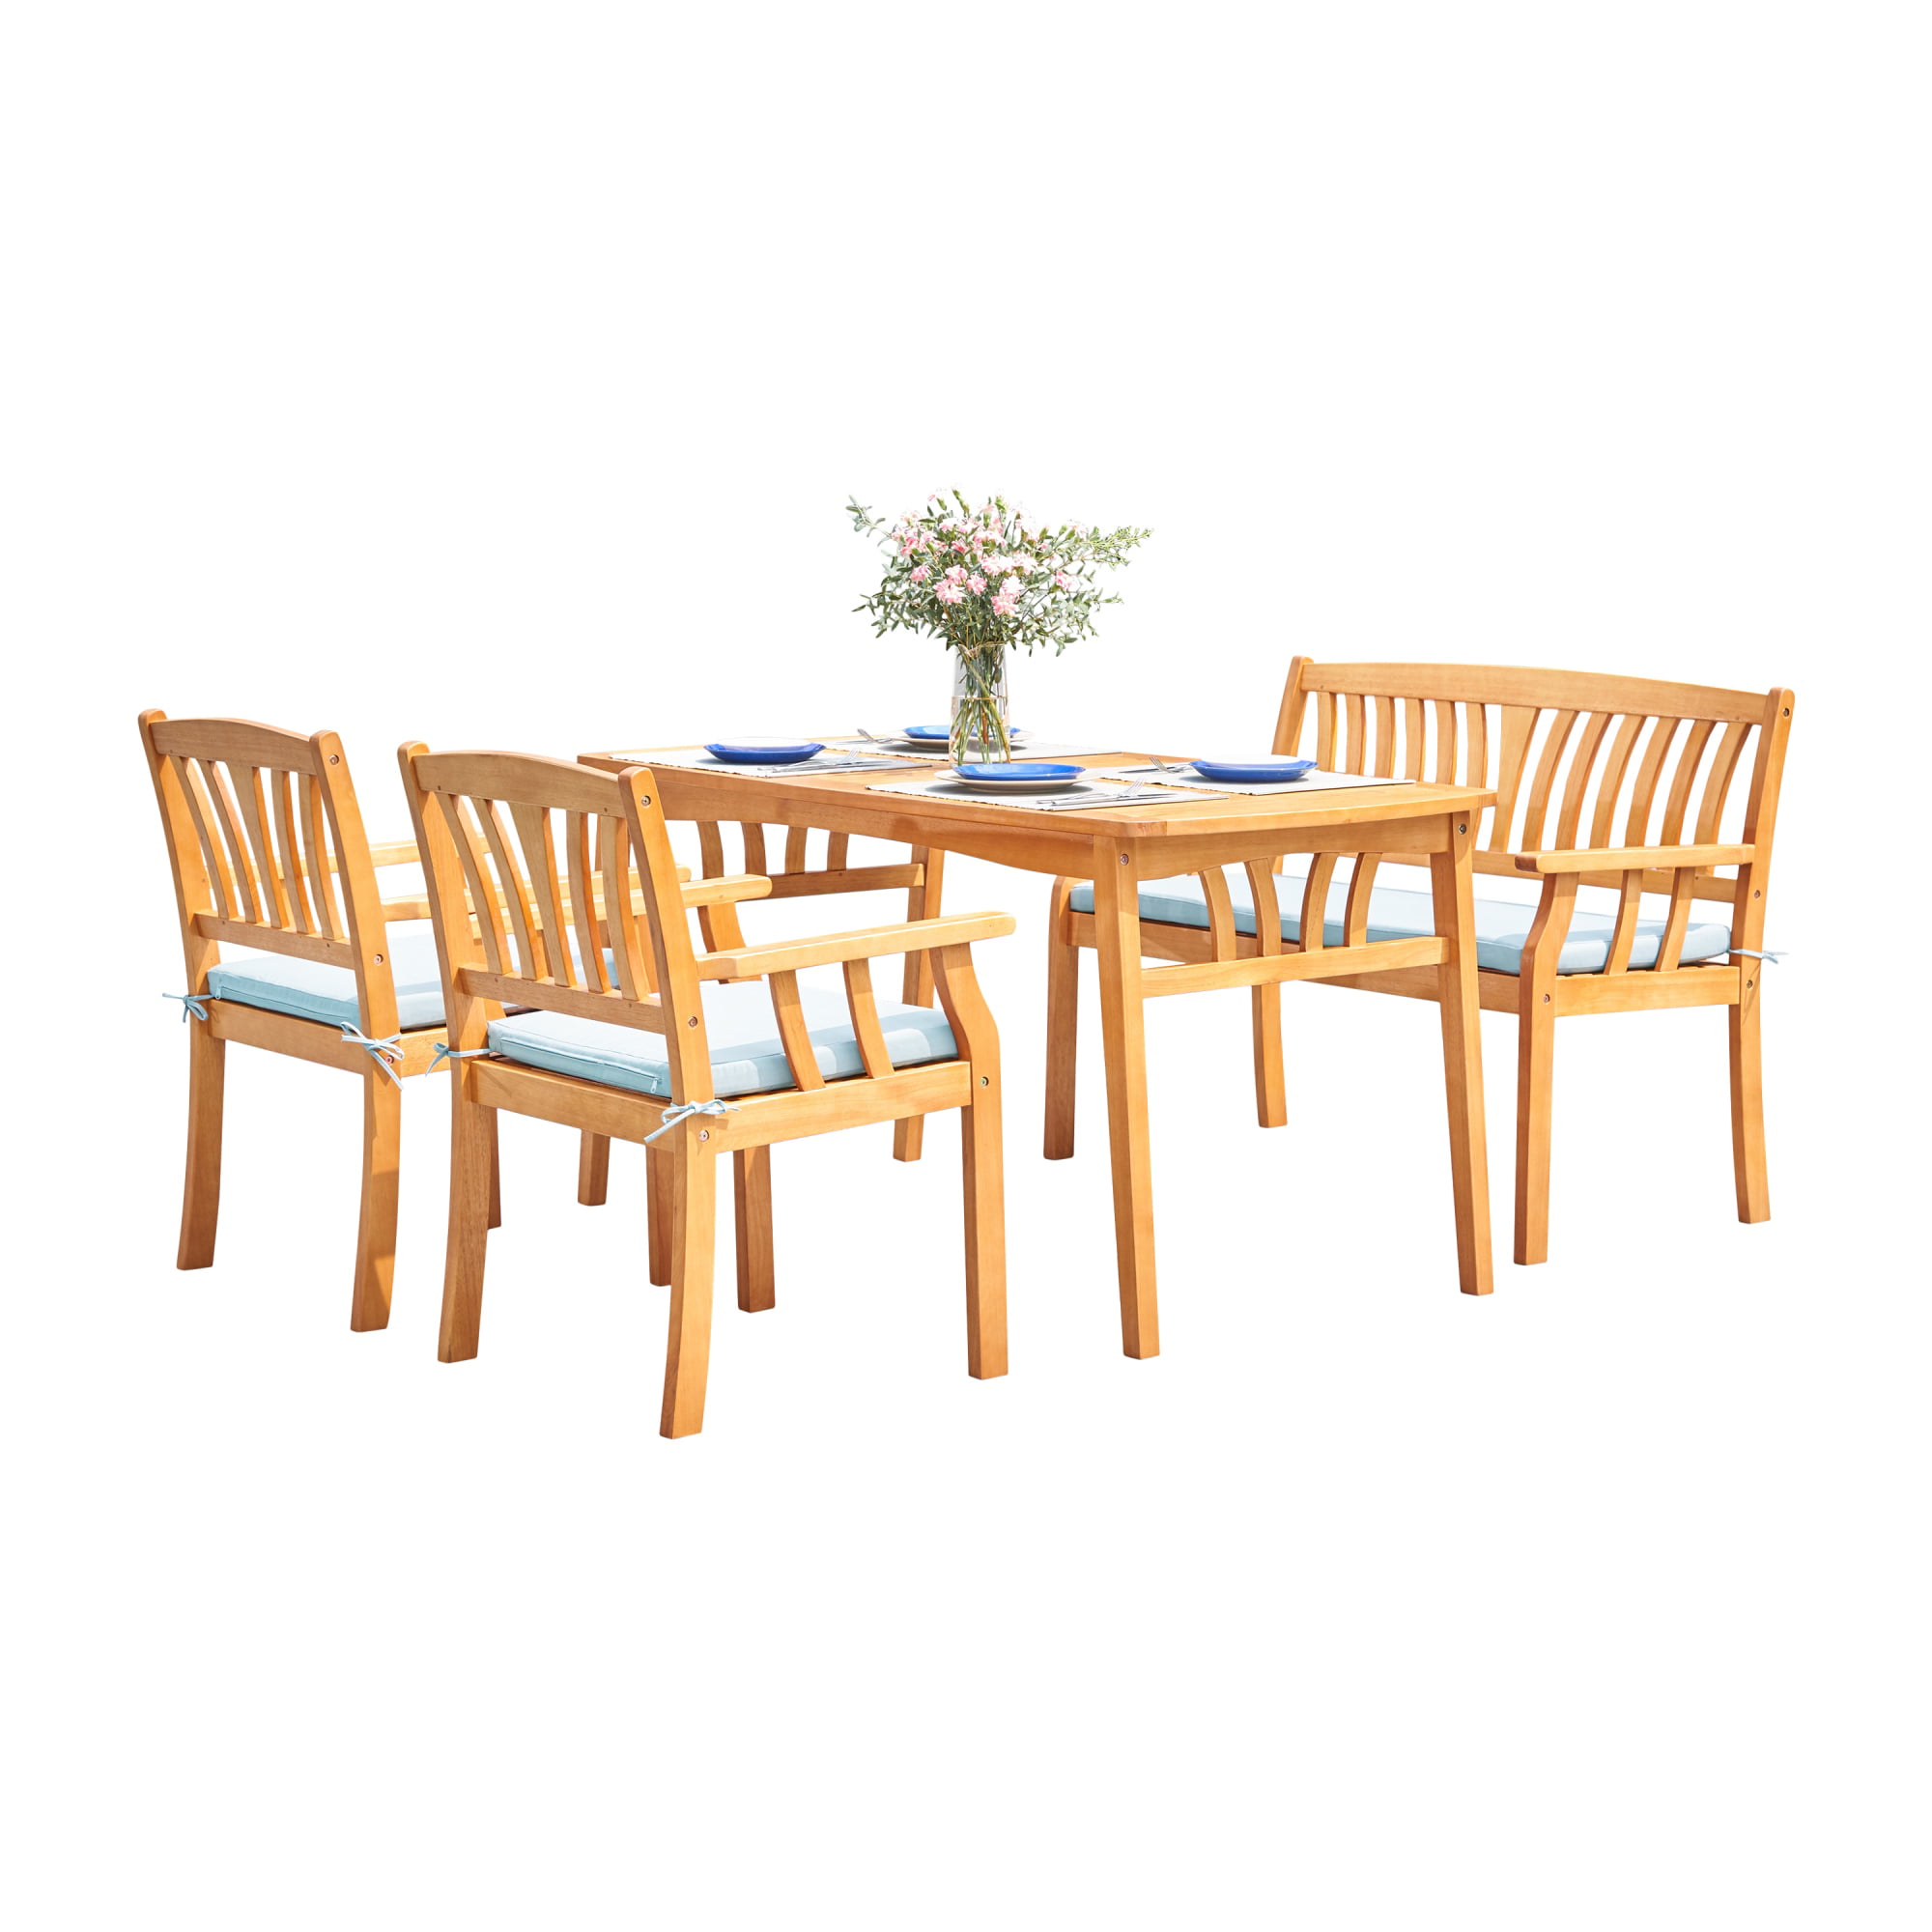 Kapalua Honey Nautical 4-Piece Wooden Outdoor Dining Set with Bench